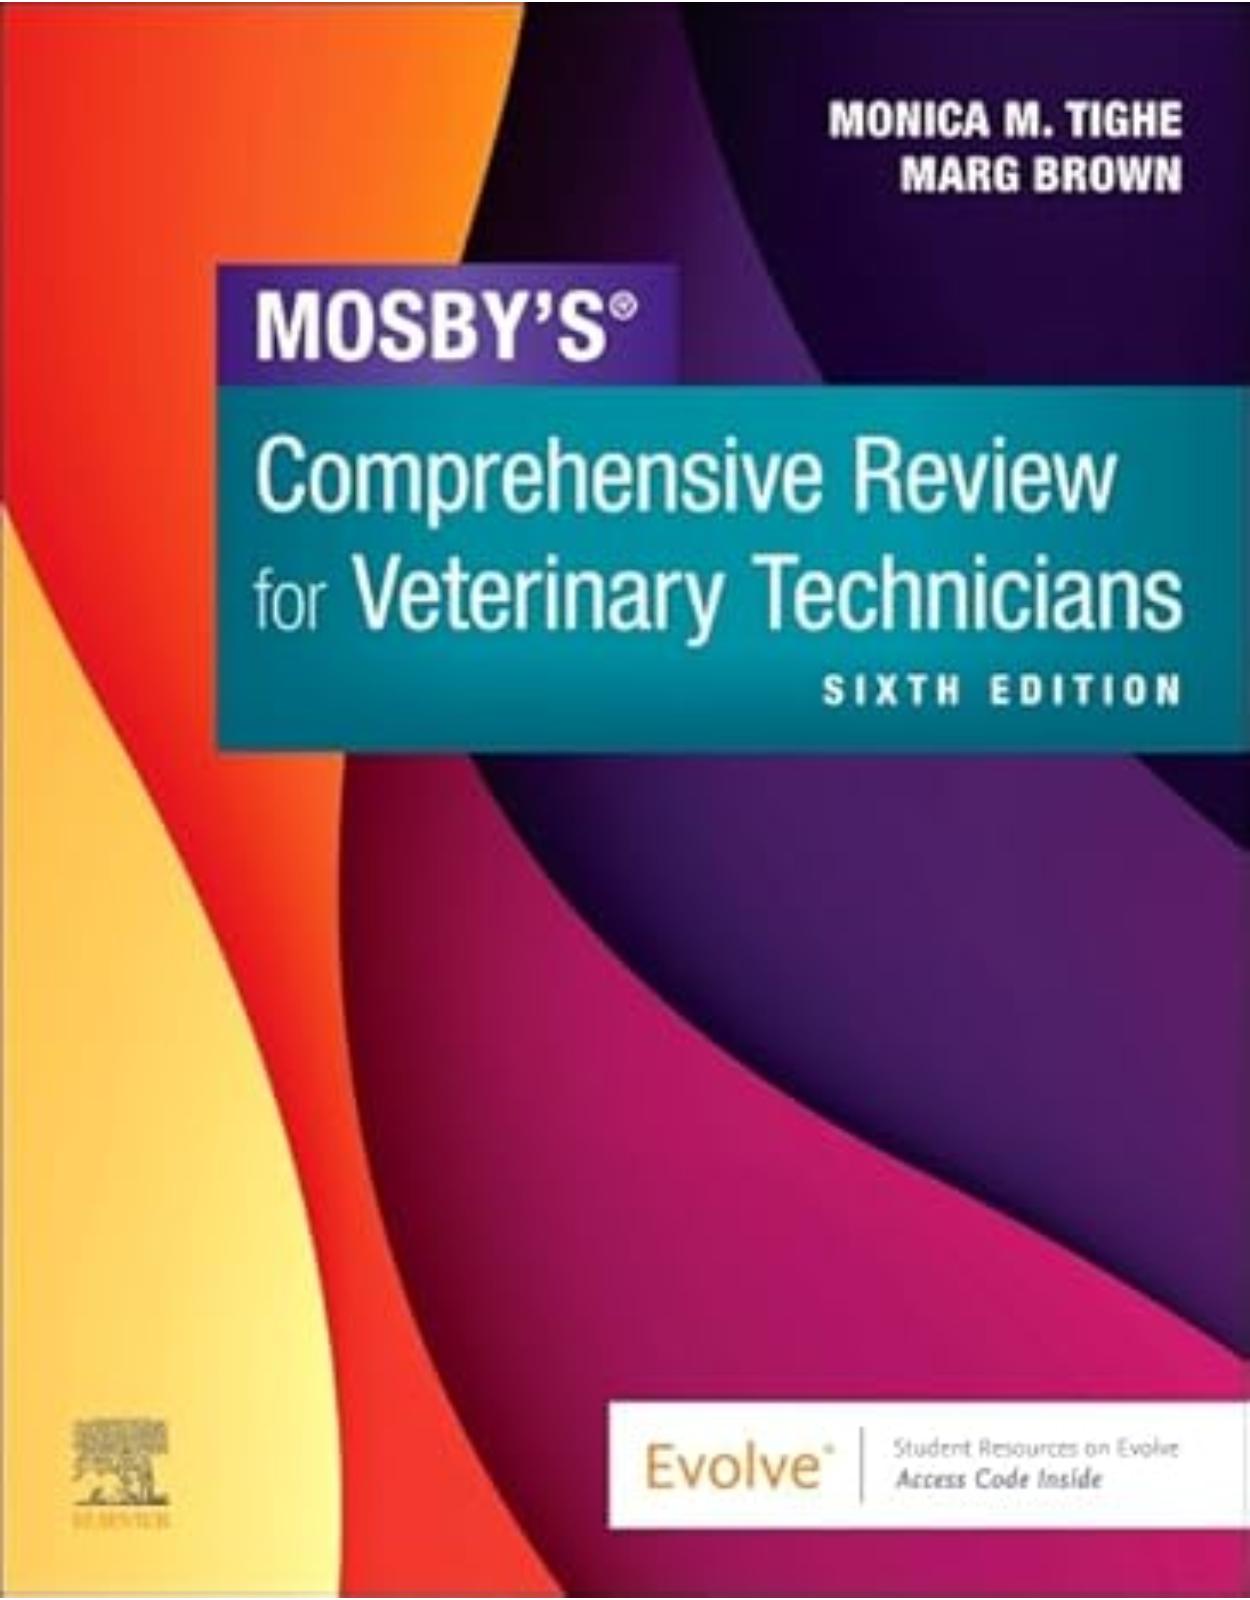 Mosby’s Comprehensive Review for Veterinary Technicians